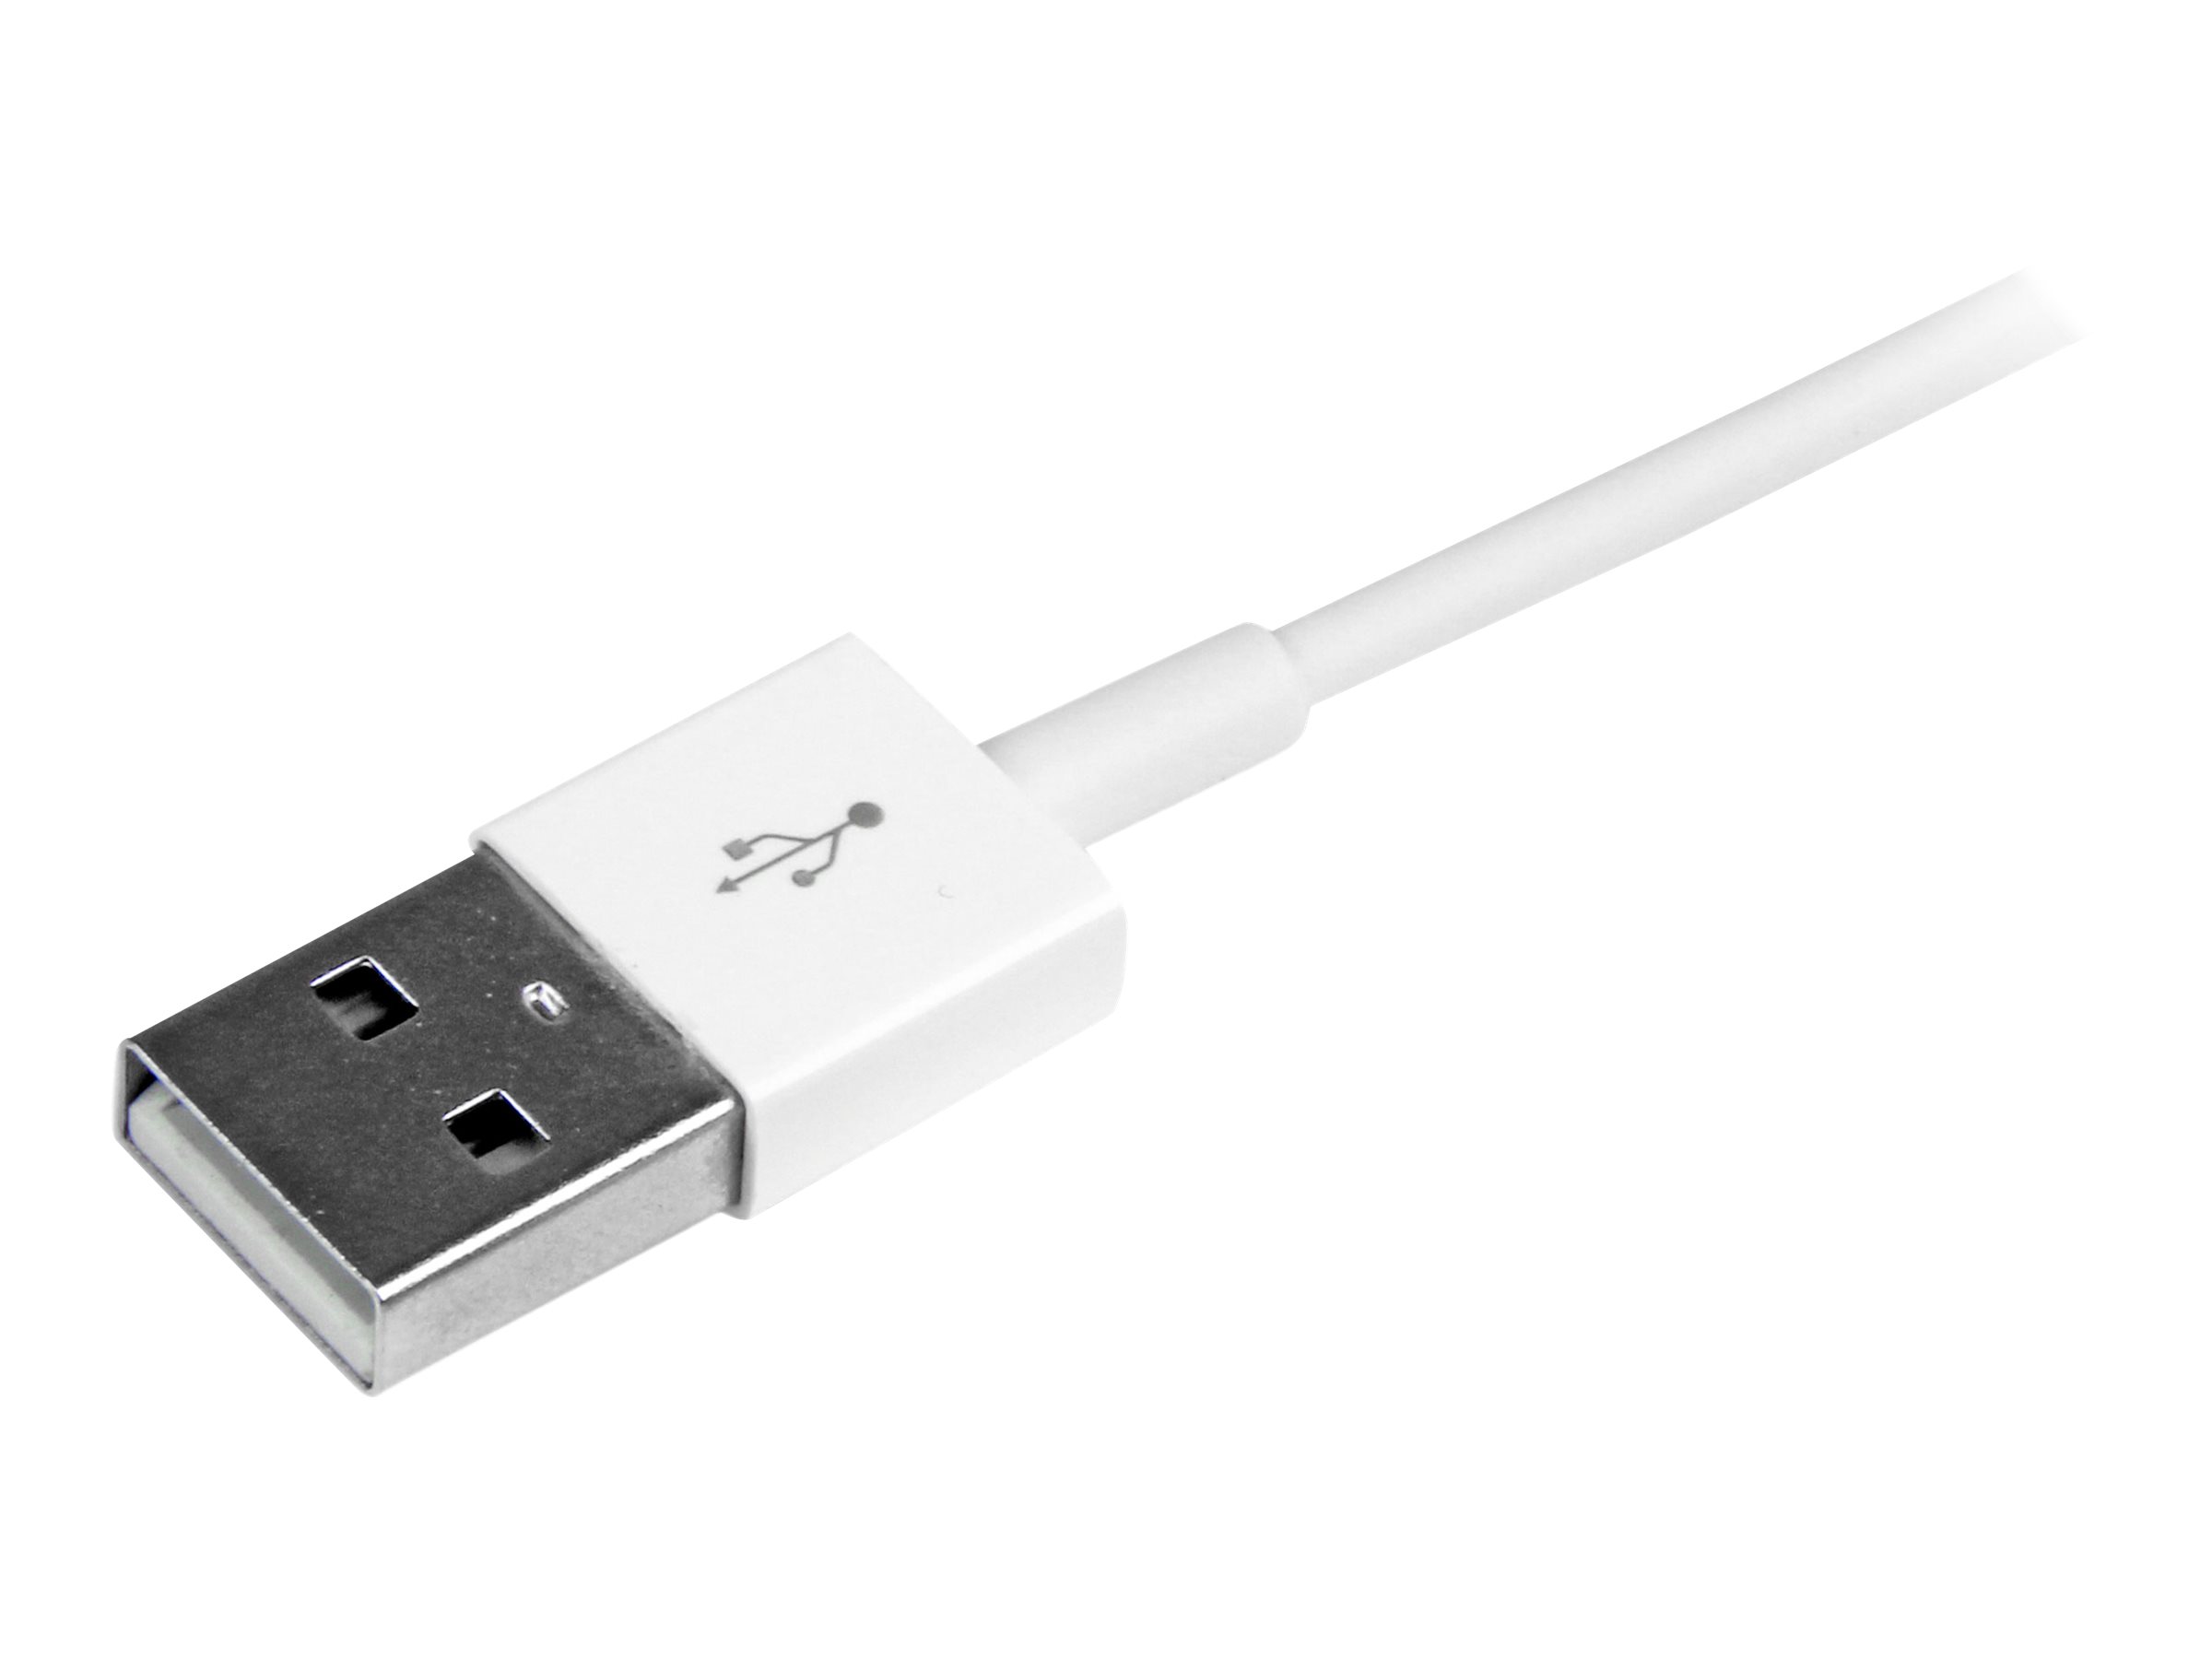 Avizar Cable USB 1m Triple Embouts Compatible iPhone iPad iPod